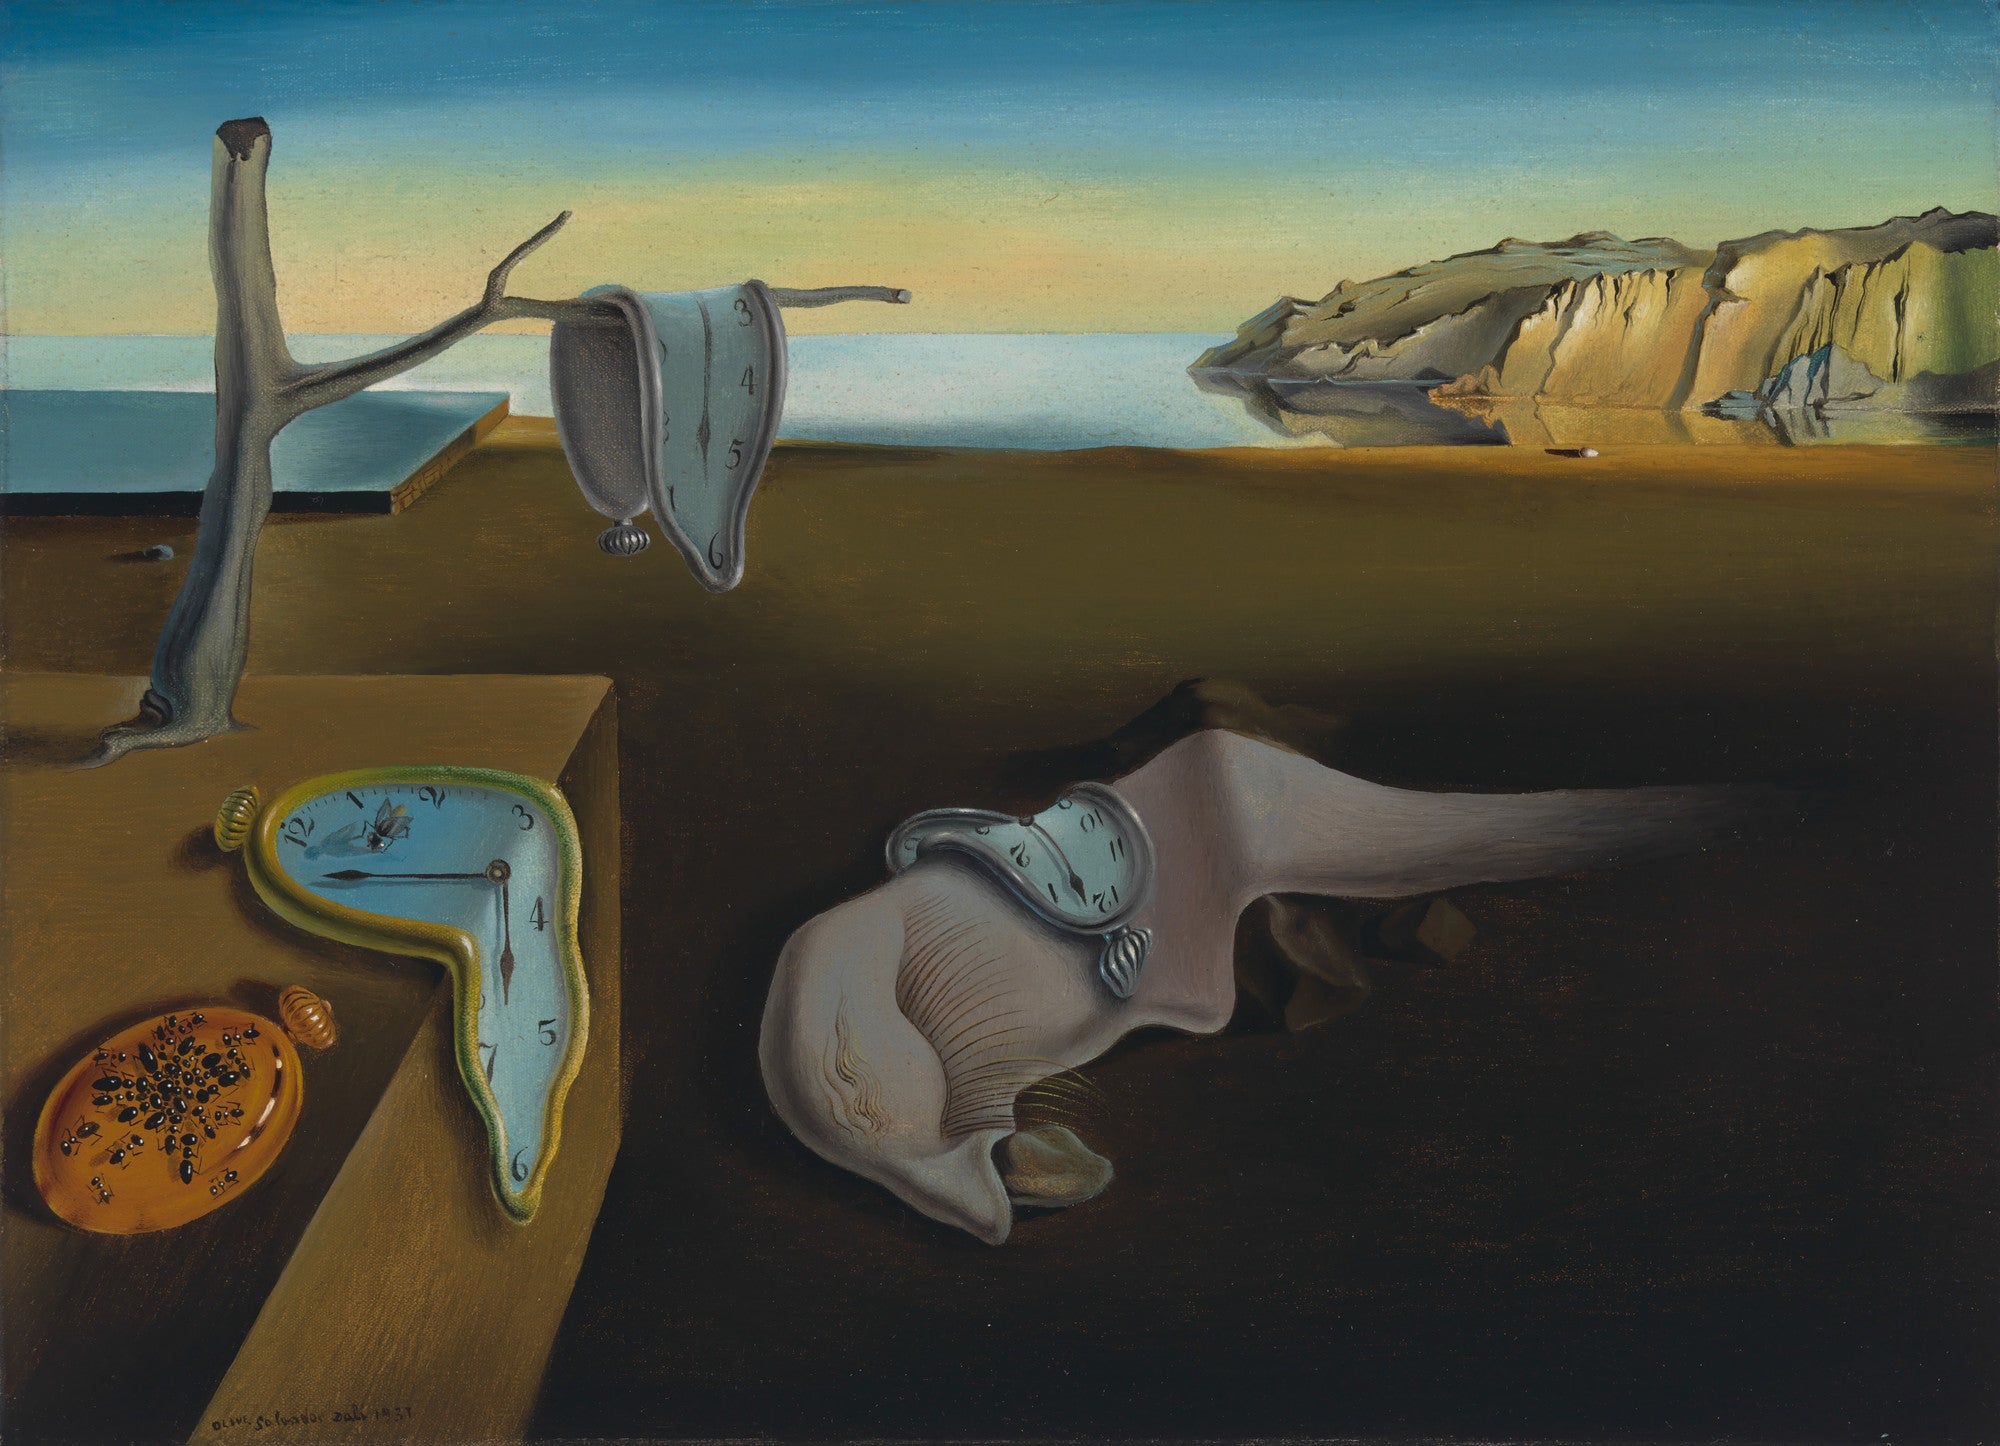 The Persistence of Memory, Salvador Dalí, 1931. Photo Courtesy of Museum of Modern Art.